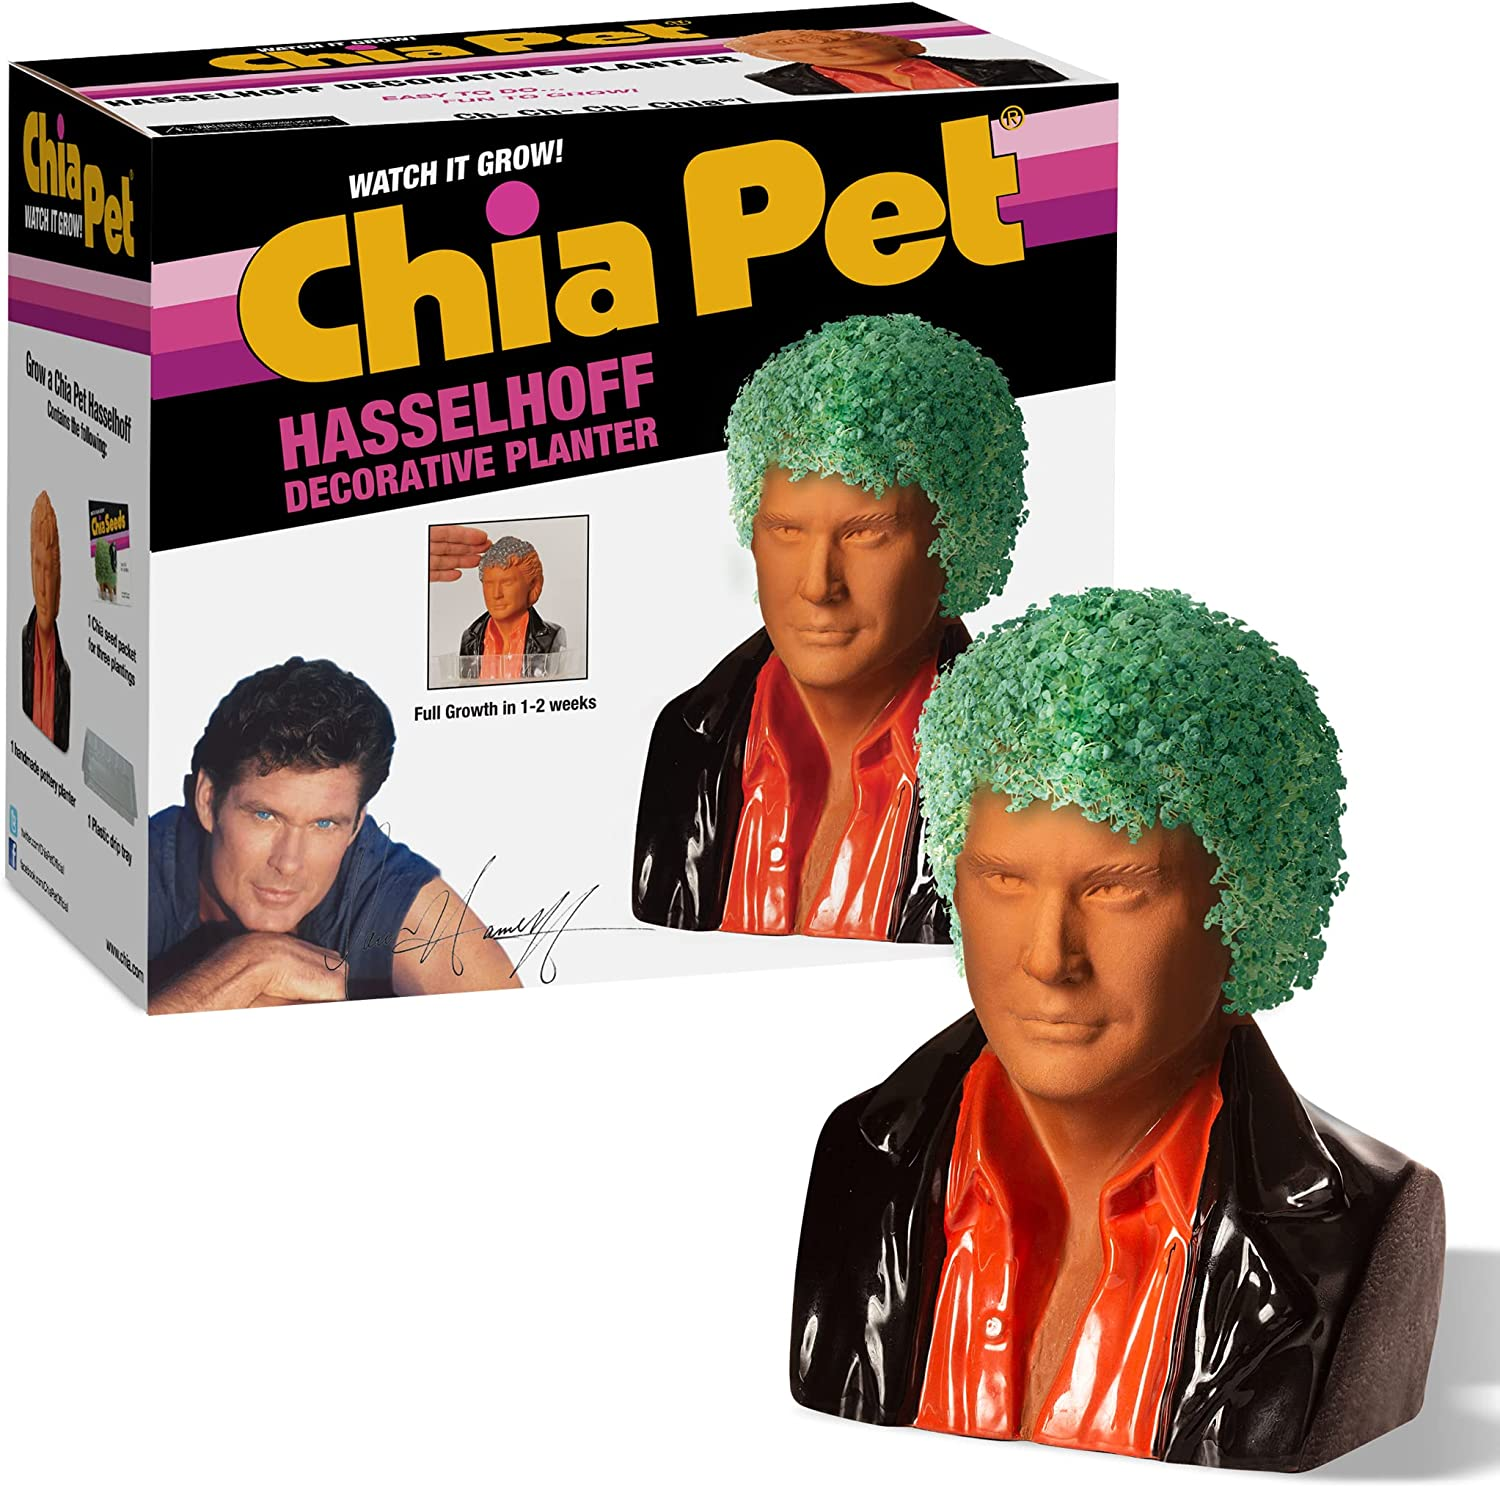 Chia Pet David Hasselhoff with Seed Pack $17.99